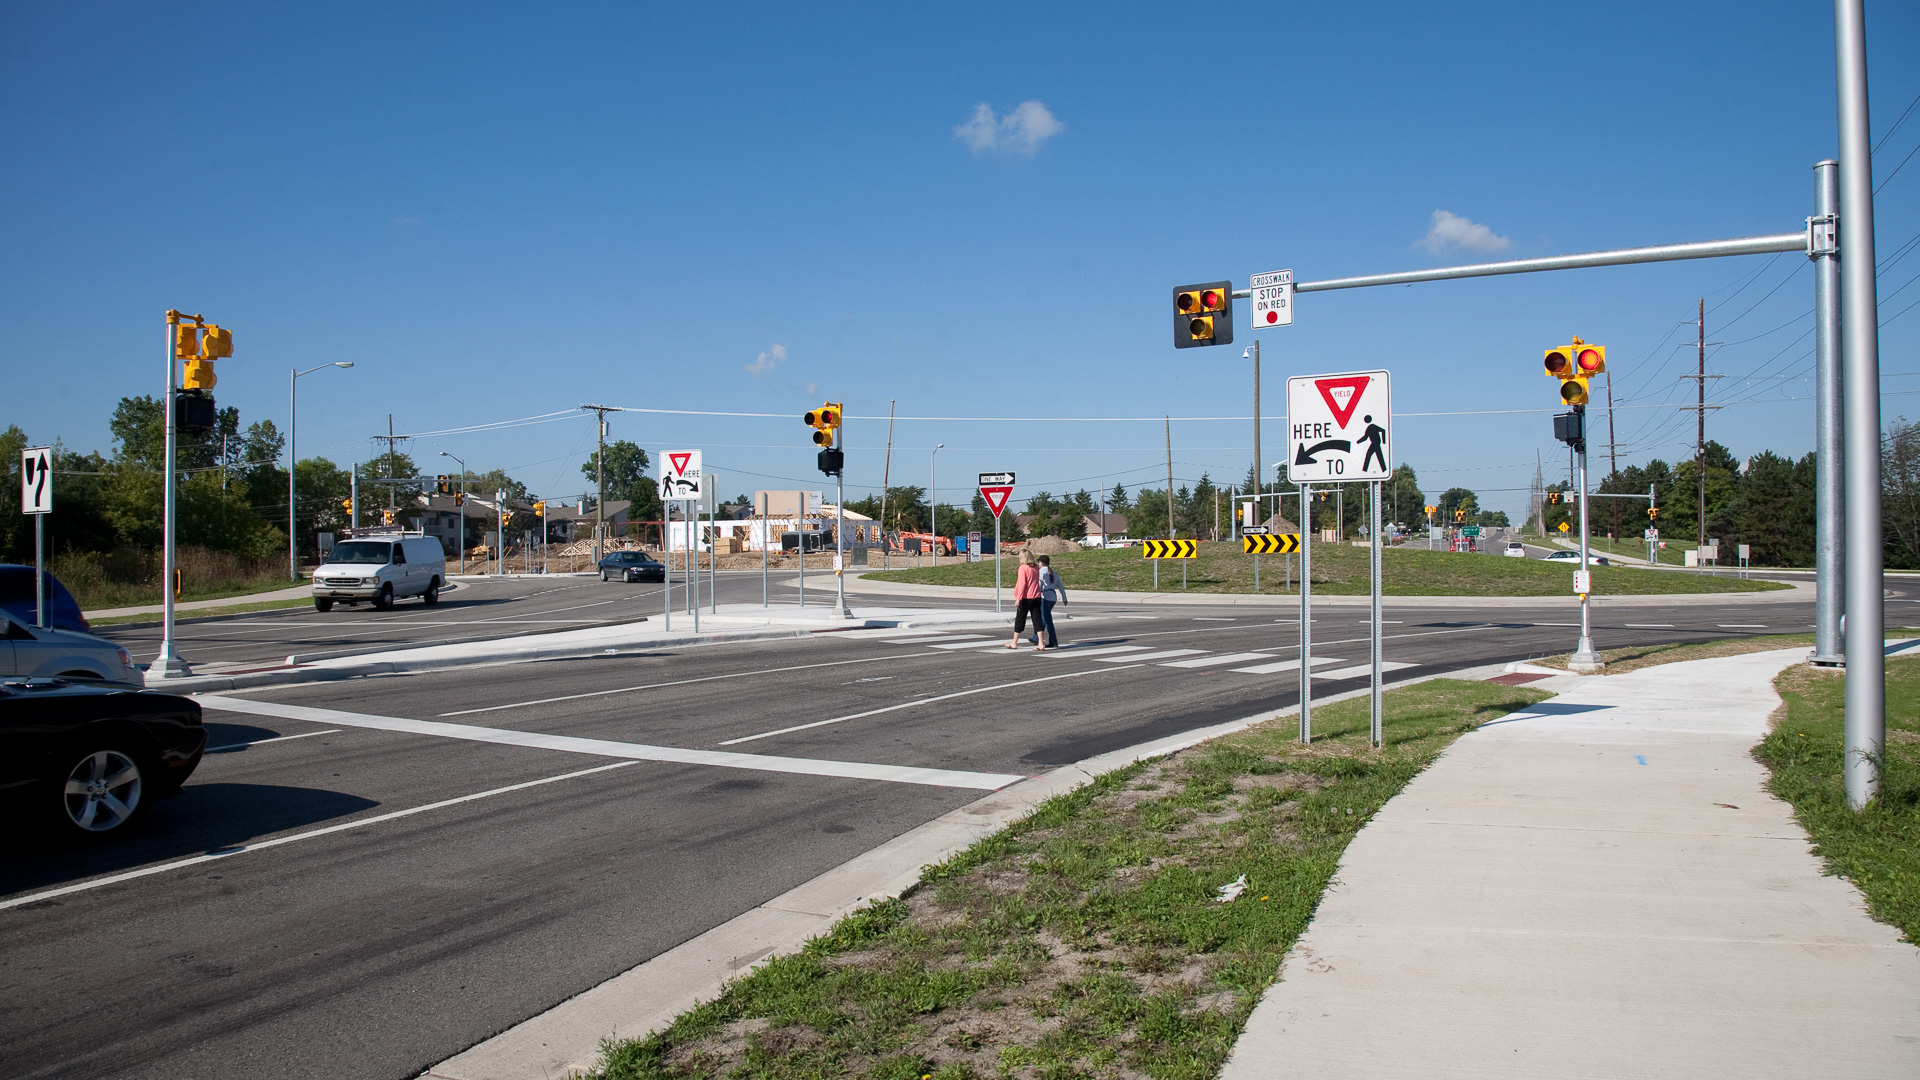 Crossing solutions for pedestrians with vision disabilities